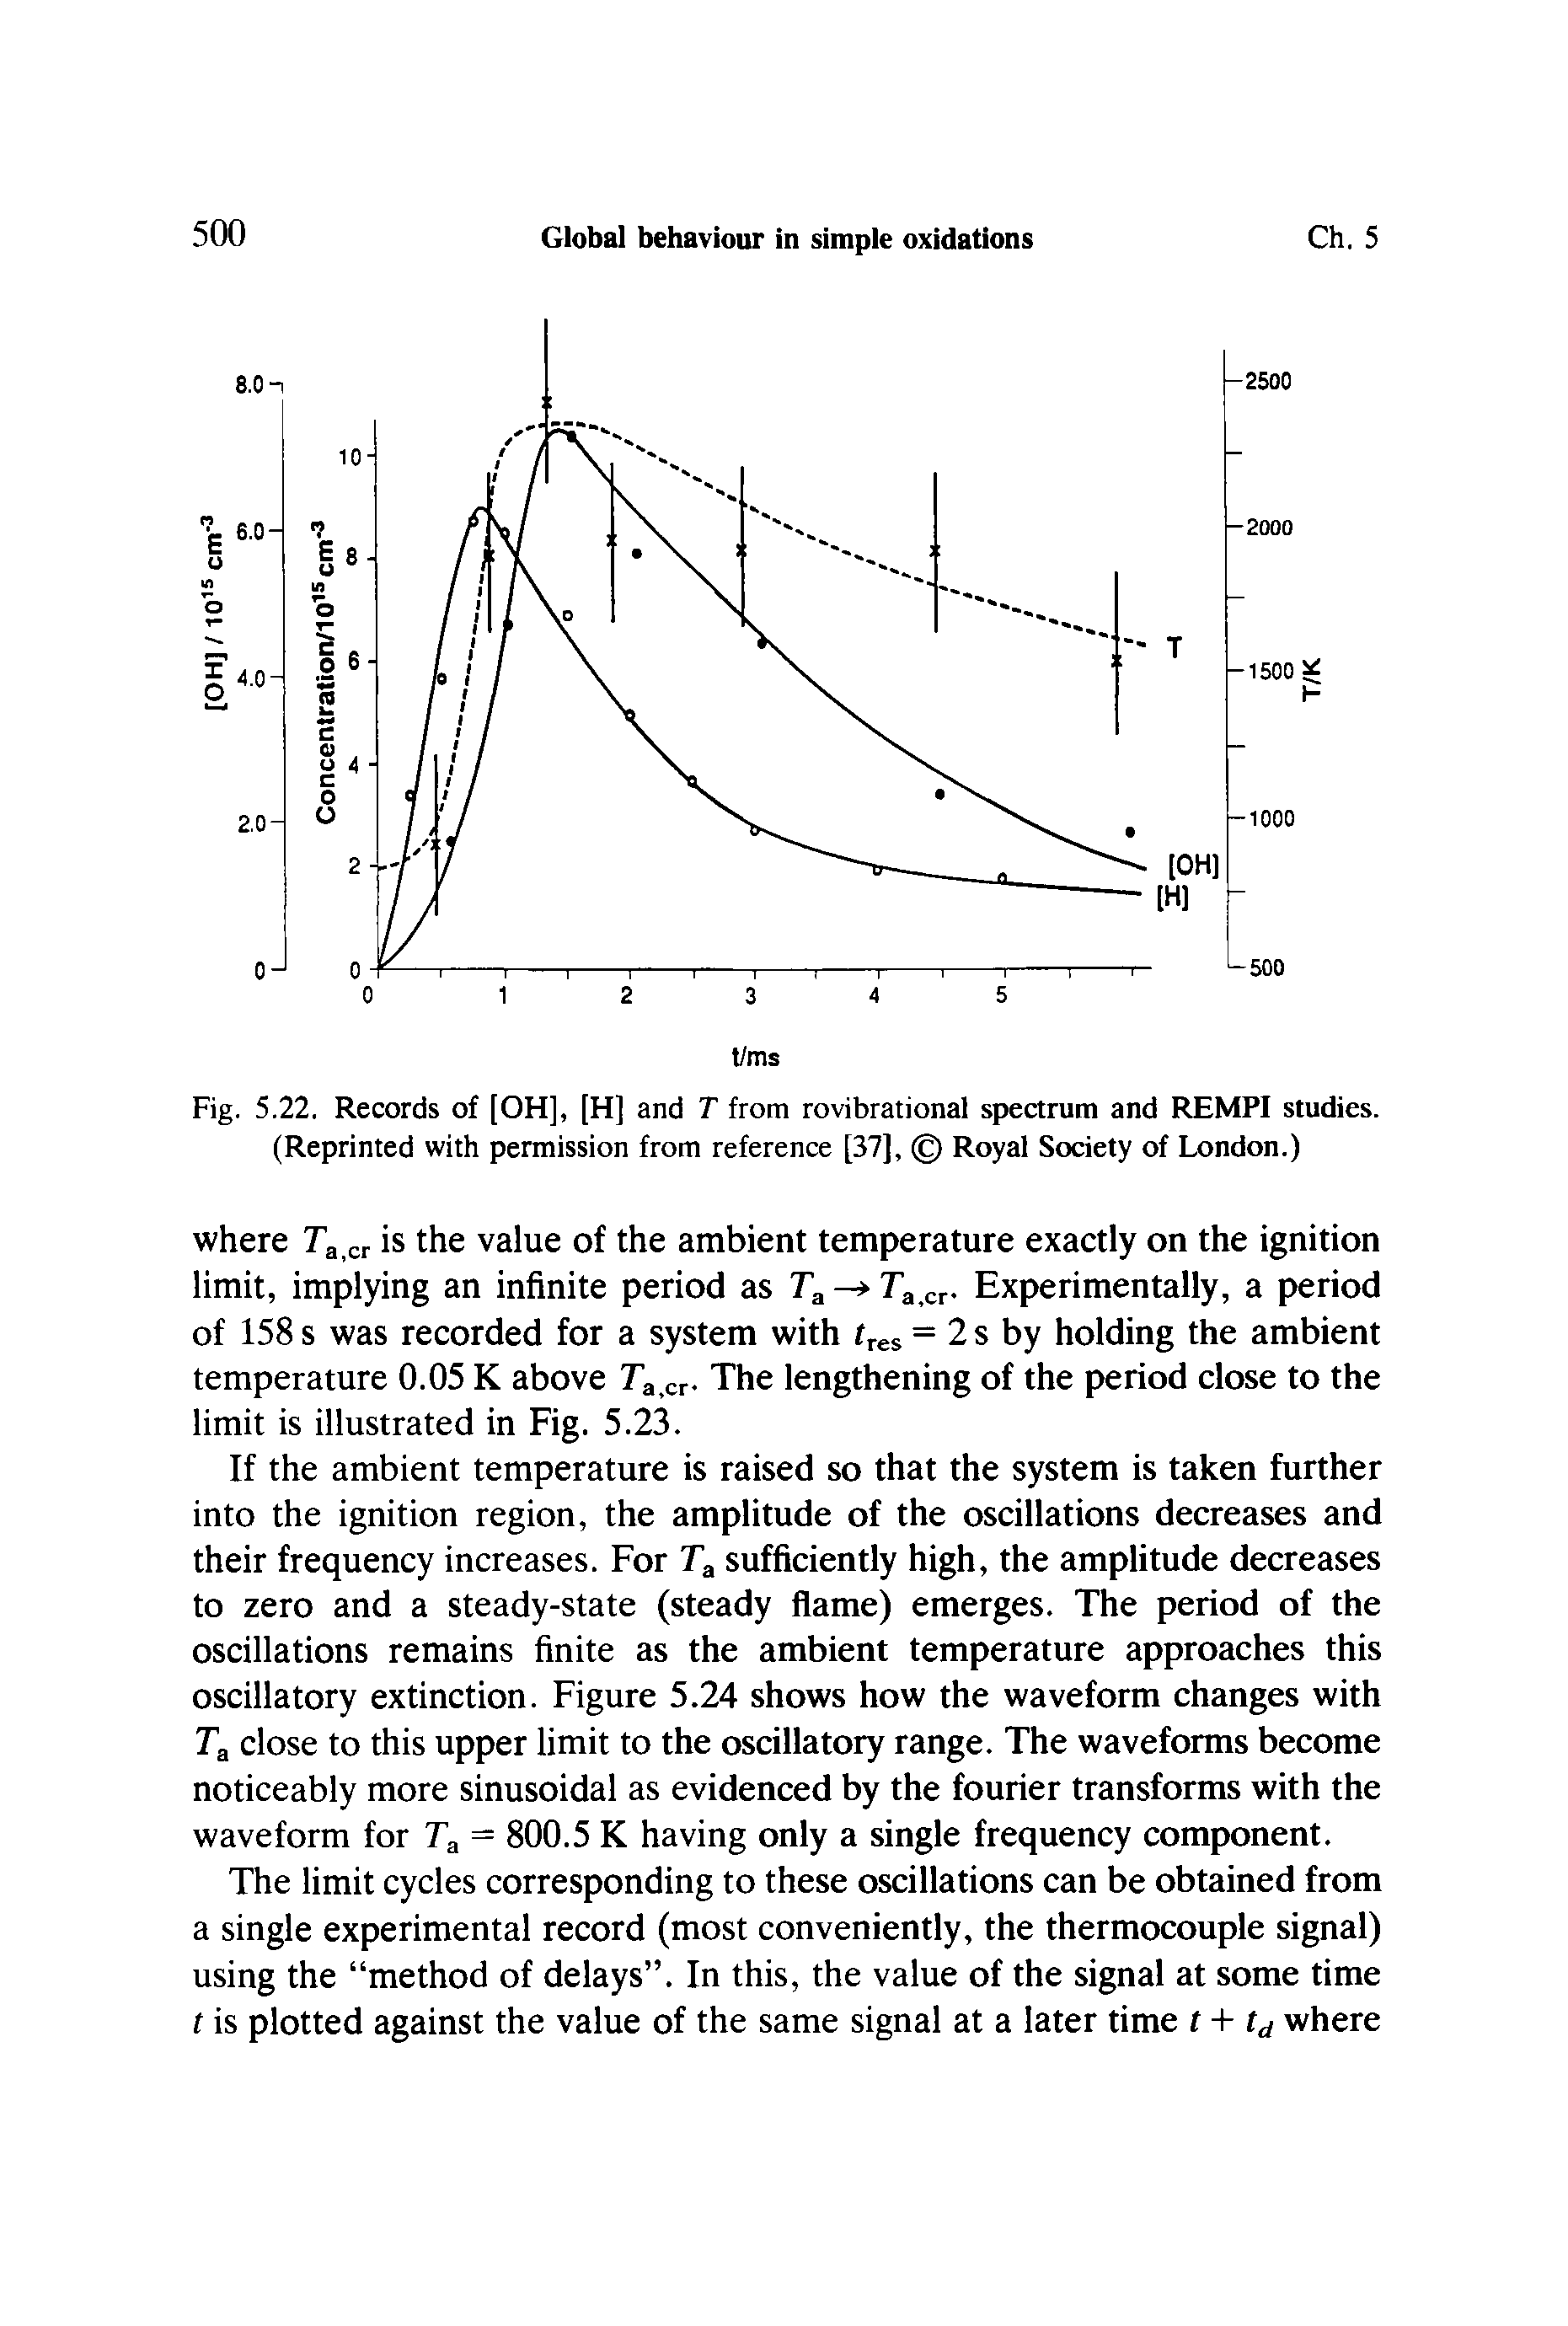 Fig. 5.22. Records of [OH], [H] and T from rovibrational spectrum and REMPI studies. (Reprinted with permission from reference [37], Royal Society of London.)...